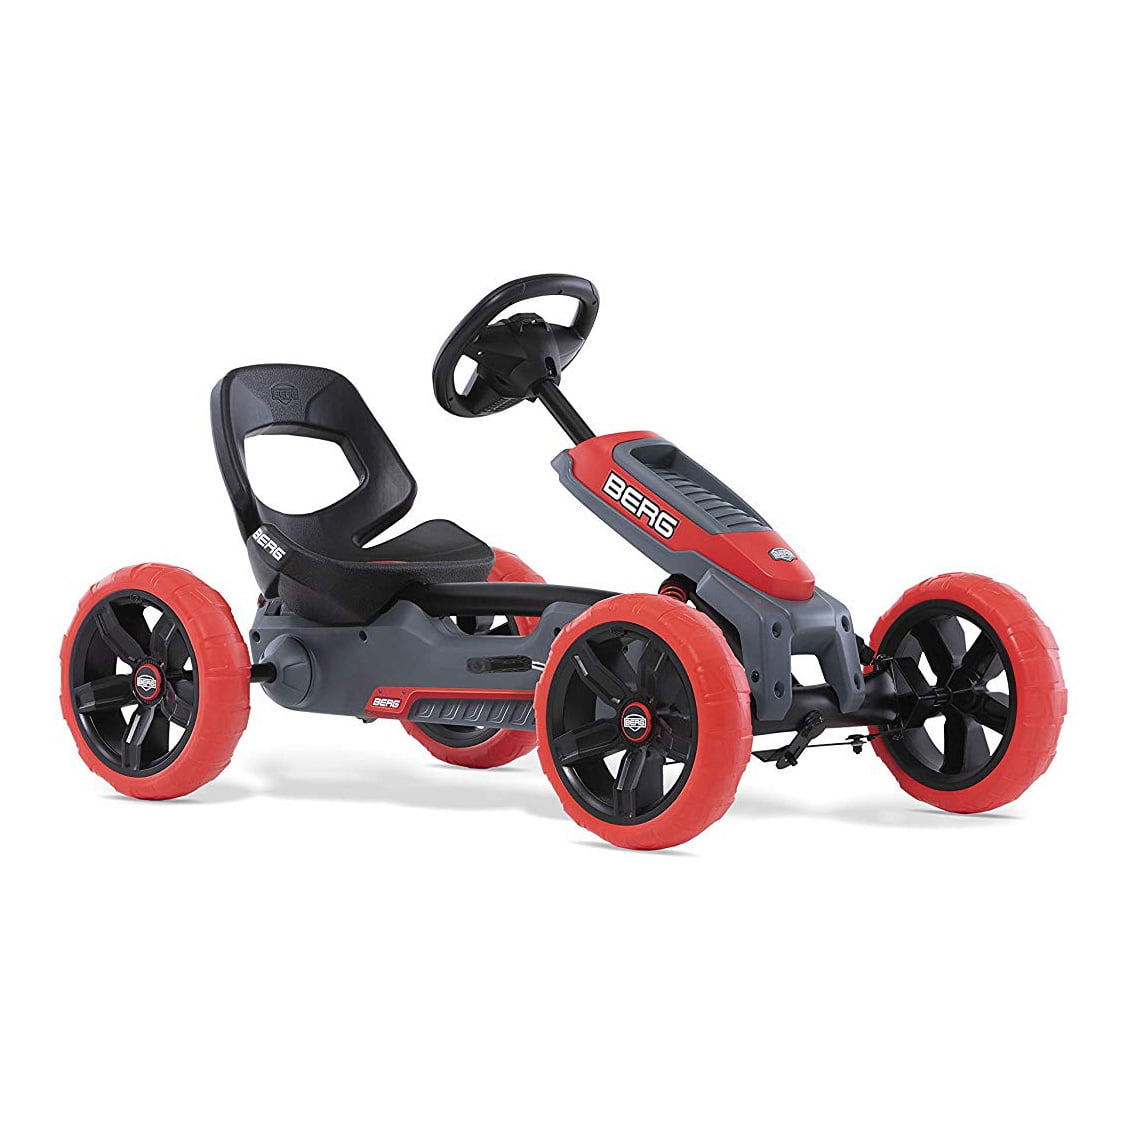 BERG Reppy Rebel Kids Pedal Go Kart Ride On Toy w/ Axle Red and Gray - Walmart.com